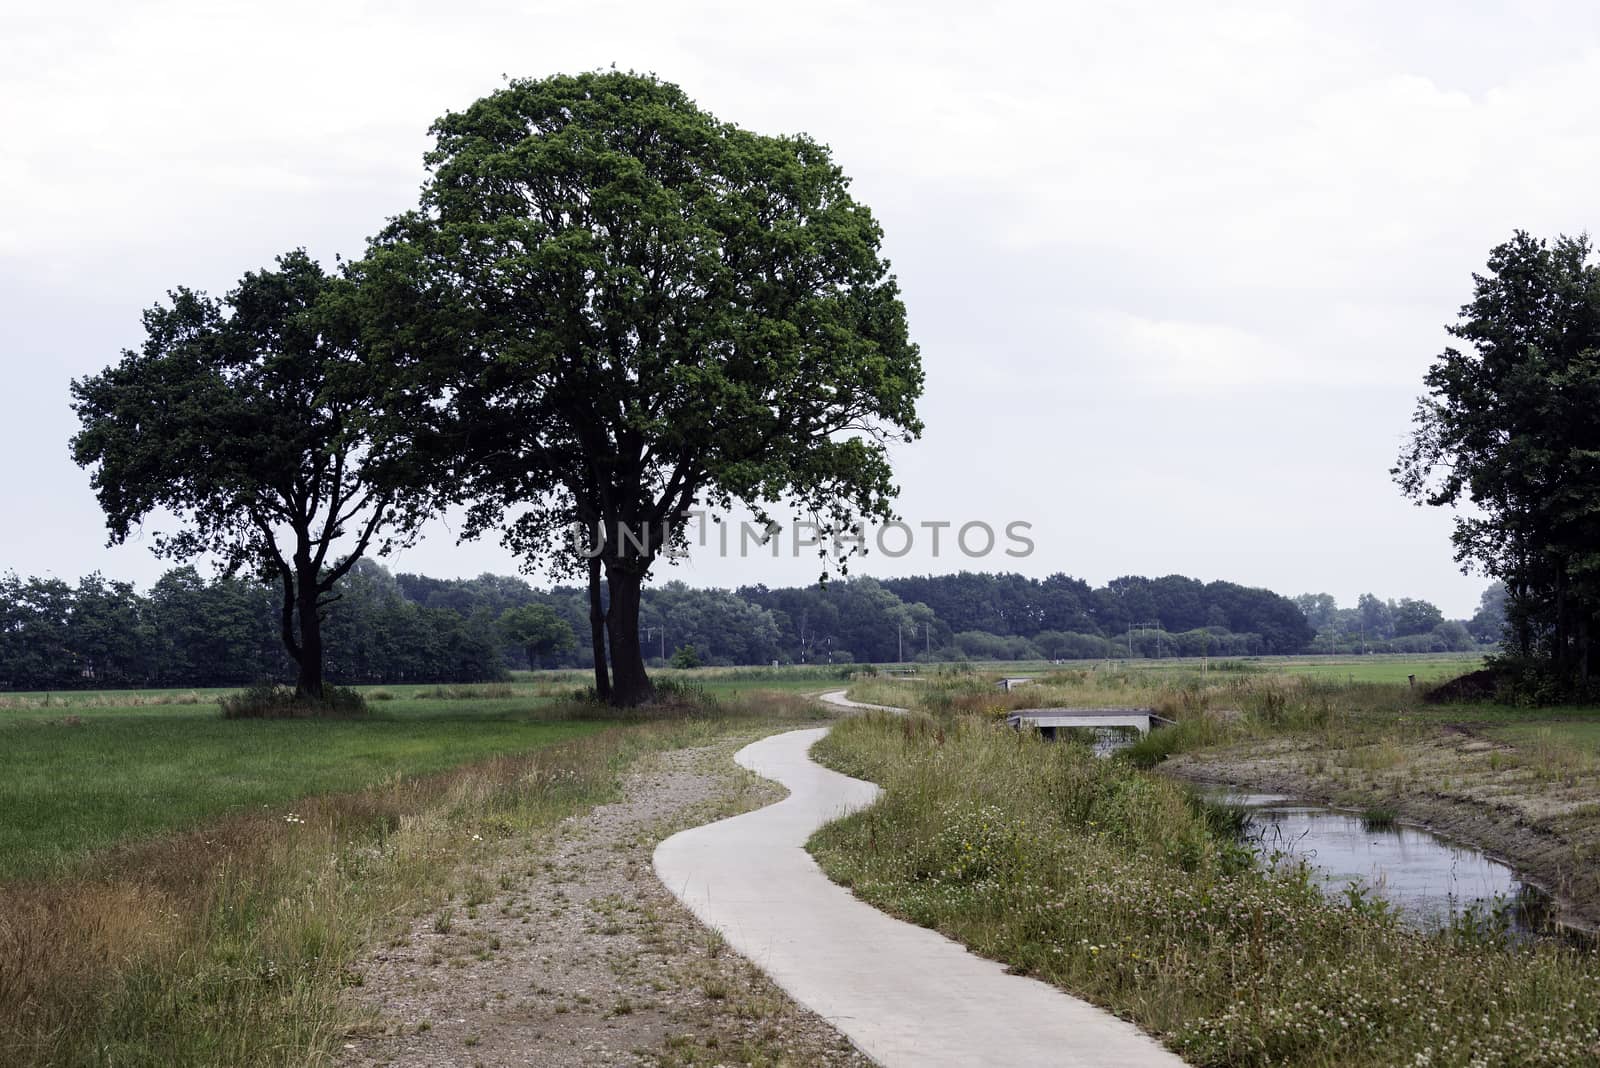 dutch nature with big trees and fields near the grass fields